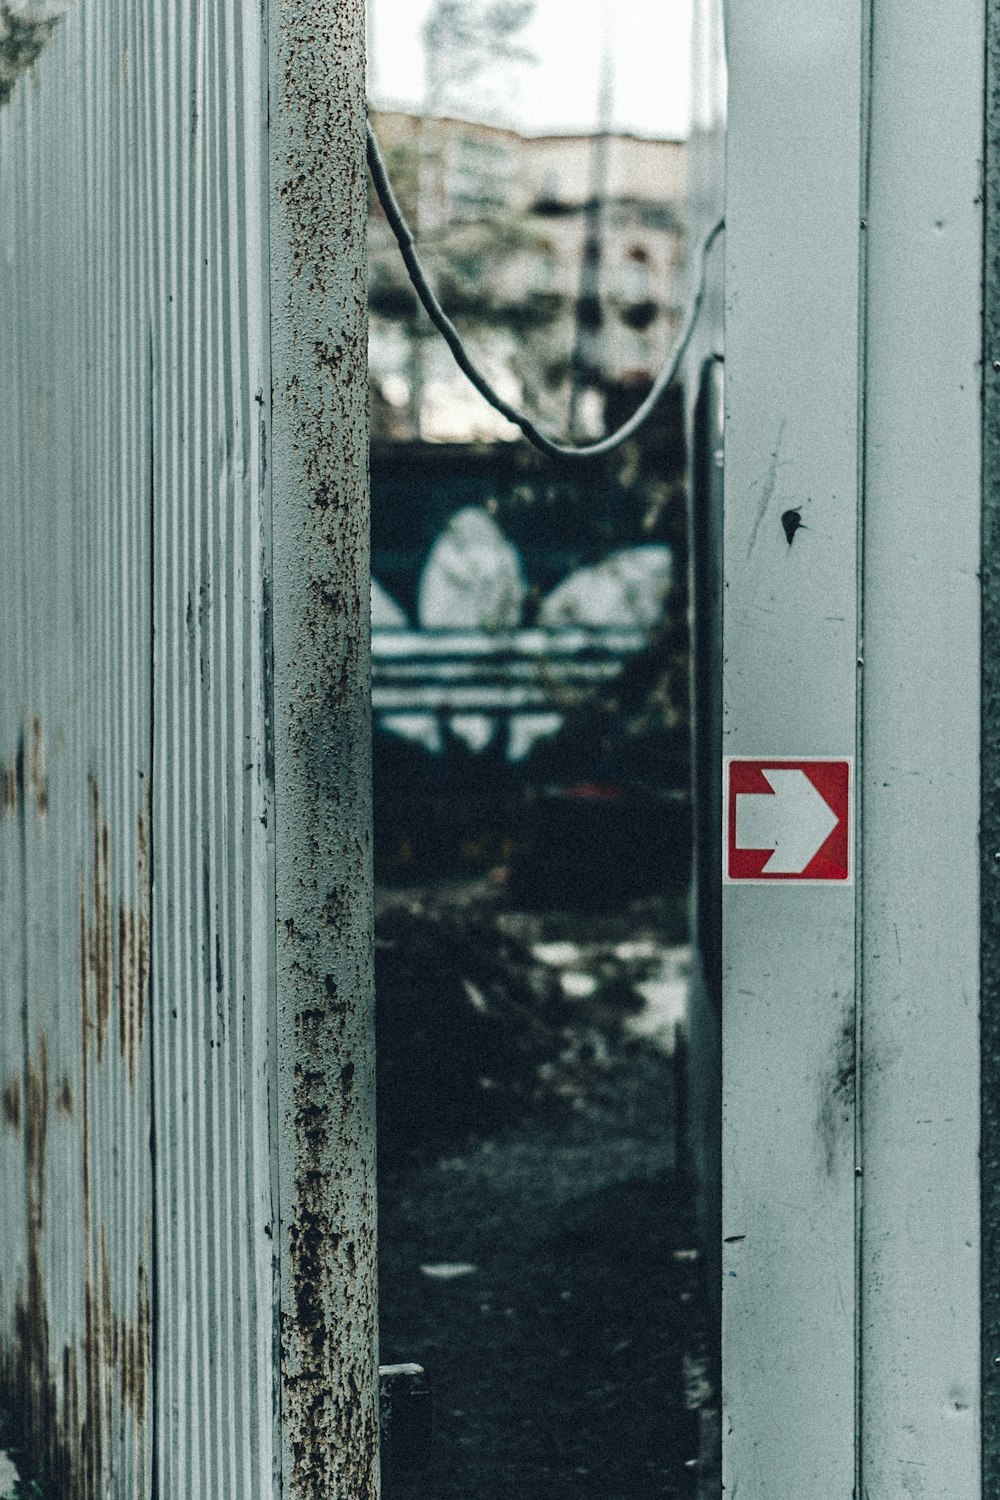 a rusted metal door with a red arrow sign on it